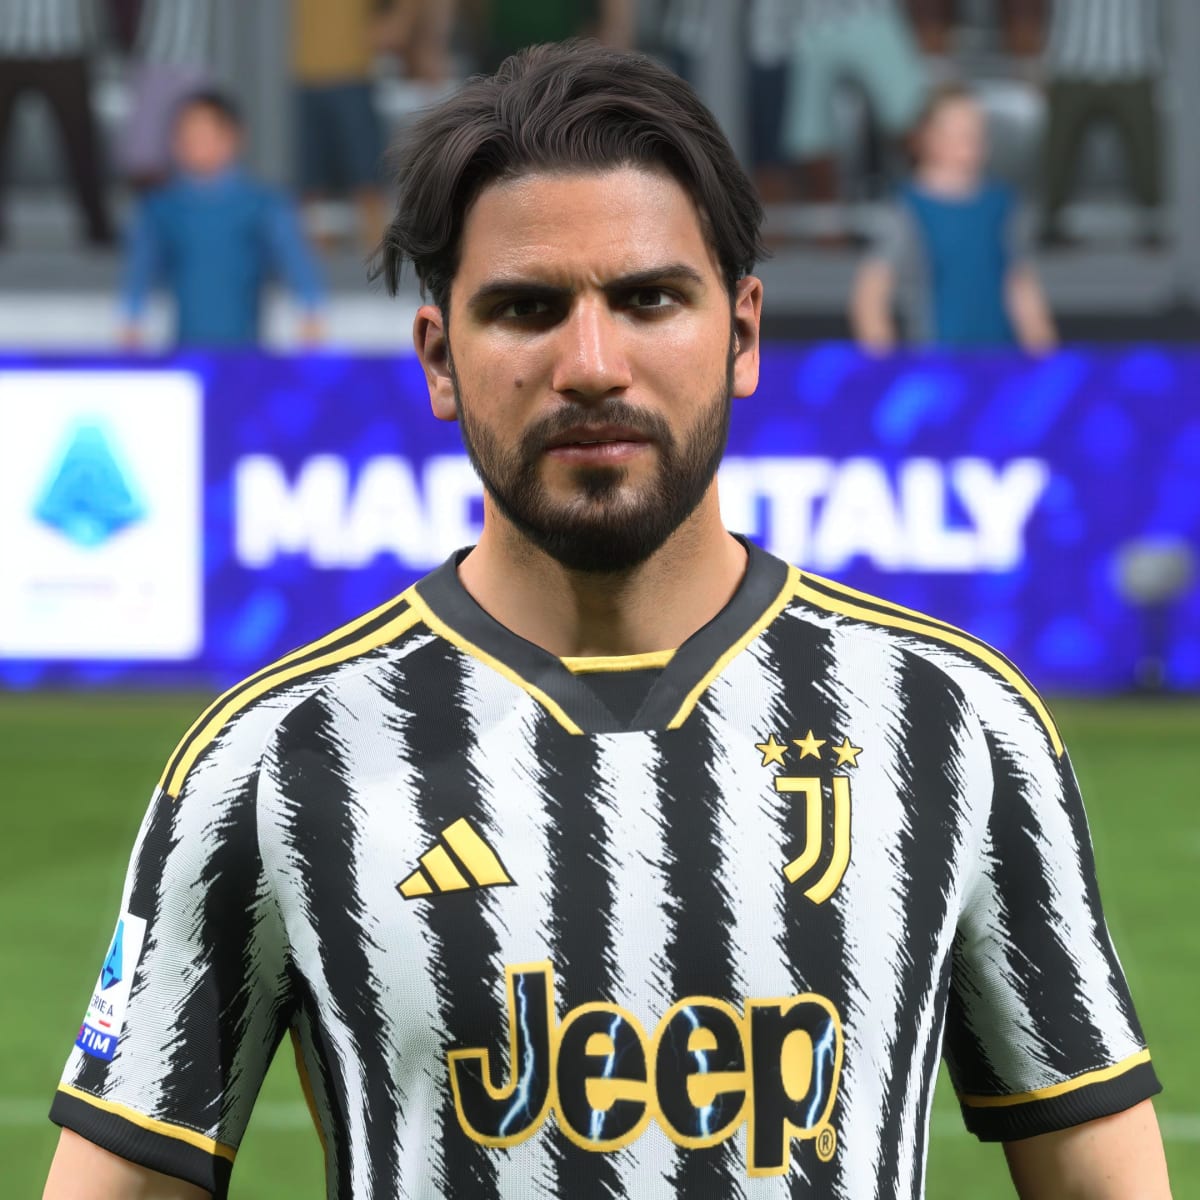 EA SPORTS FC 24 - Official Features & Leaks 